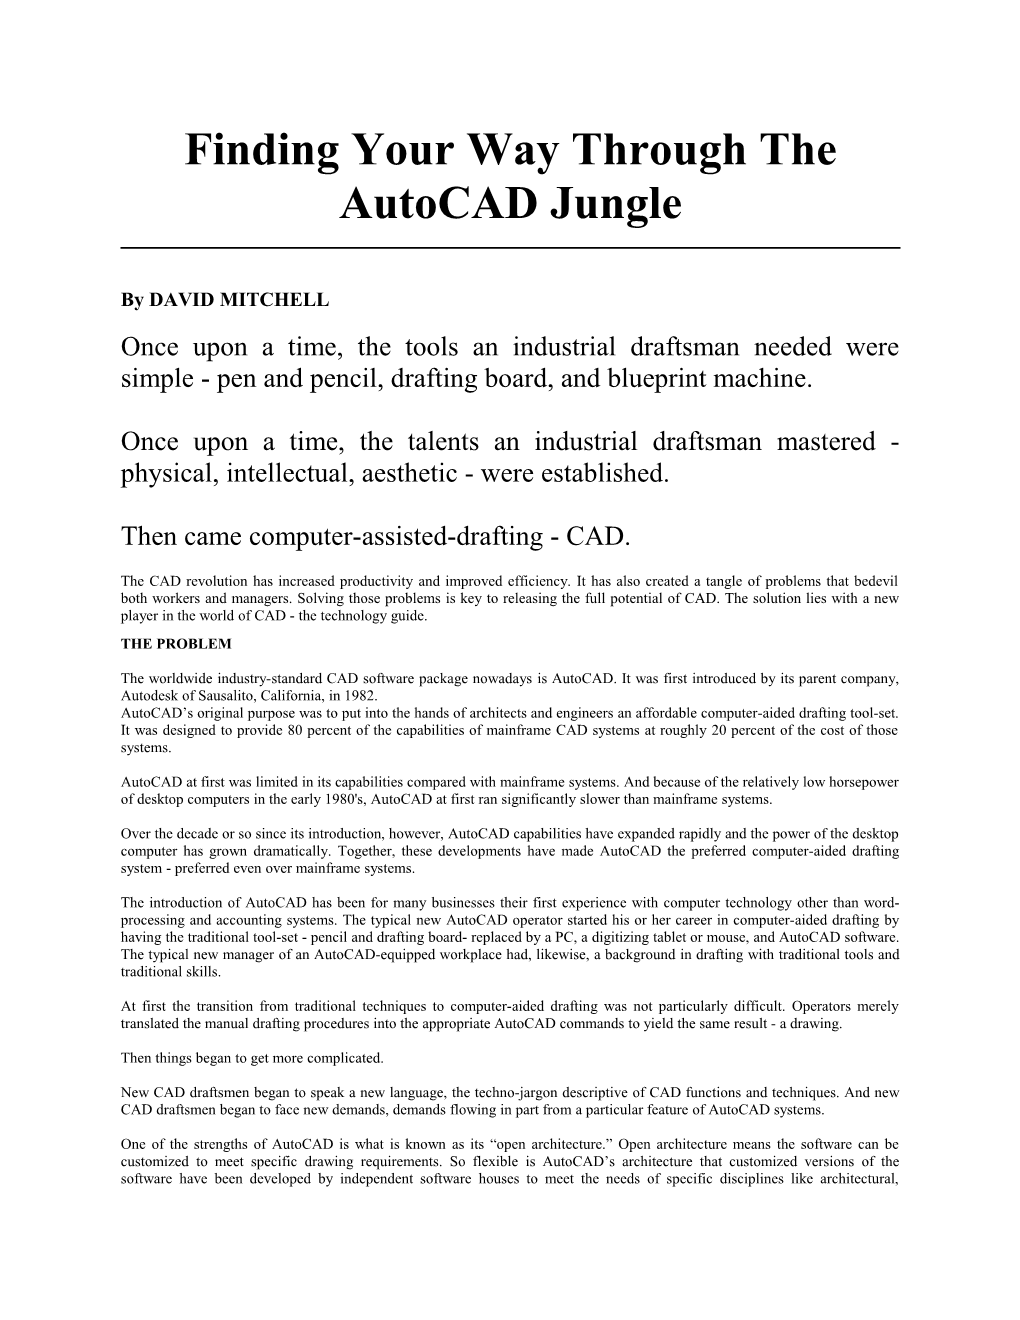 Finding Your Way Through the Autocad Jungle